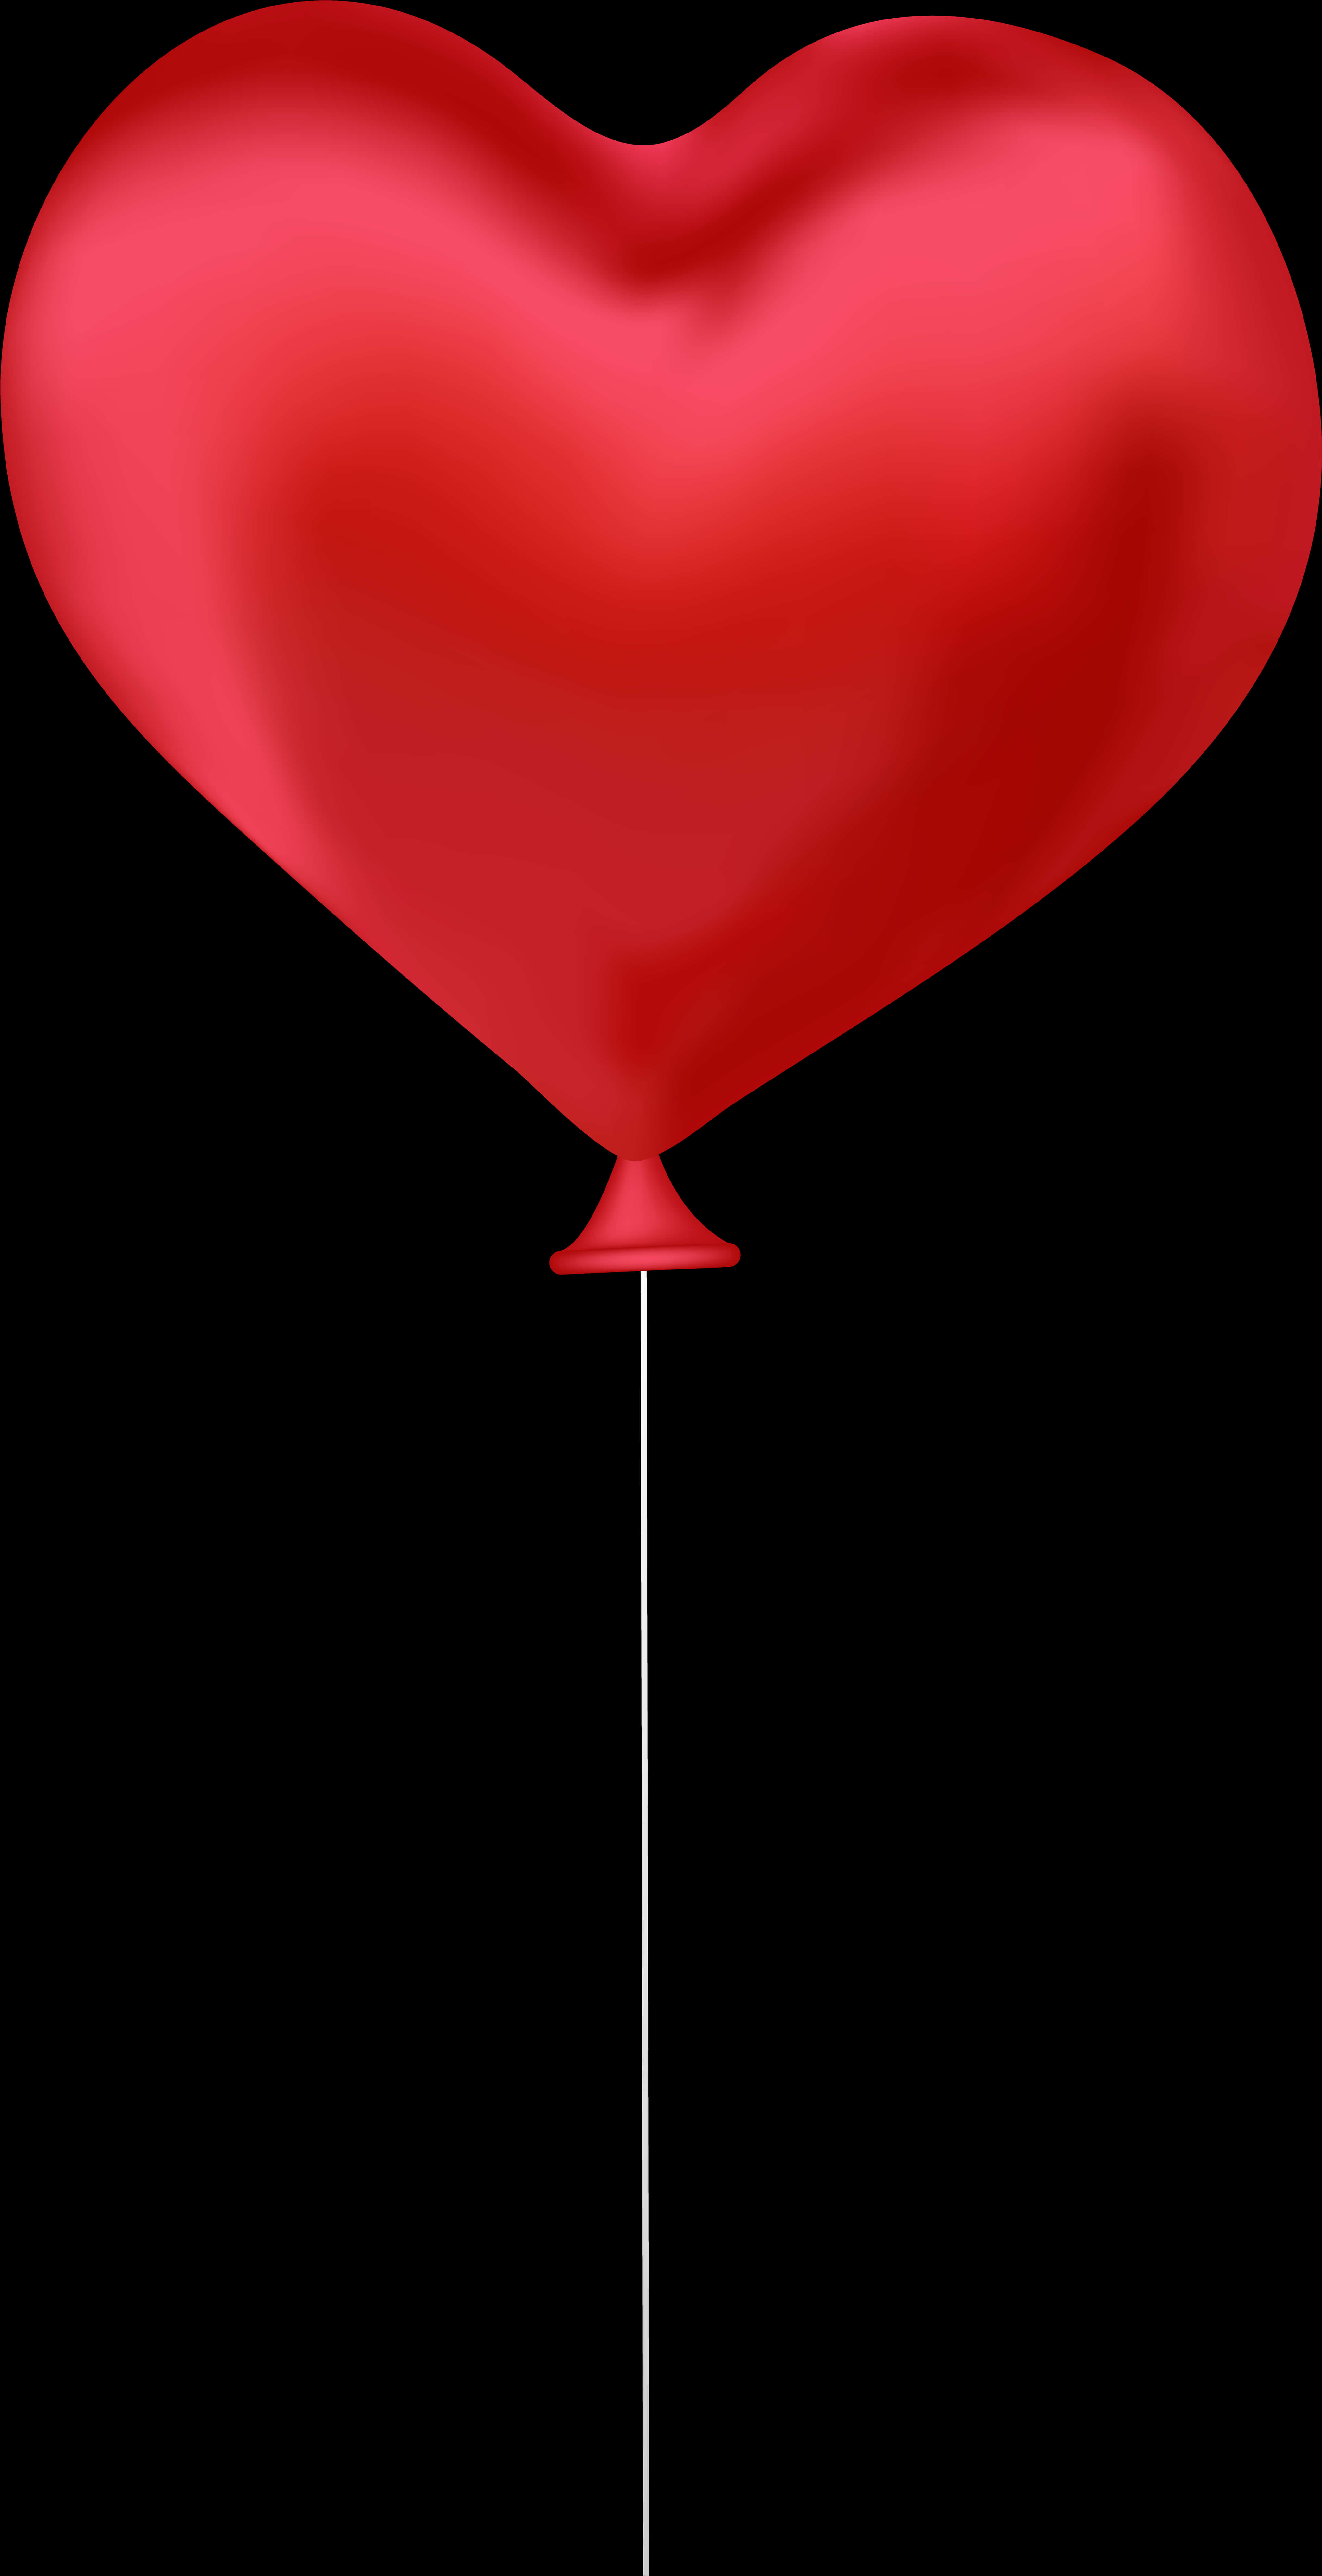 Download Red Heart Balloonon Black Background | Wallpapers.com